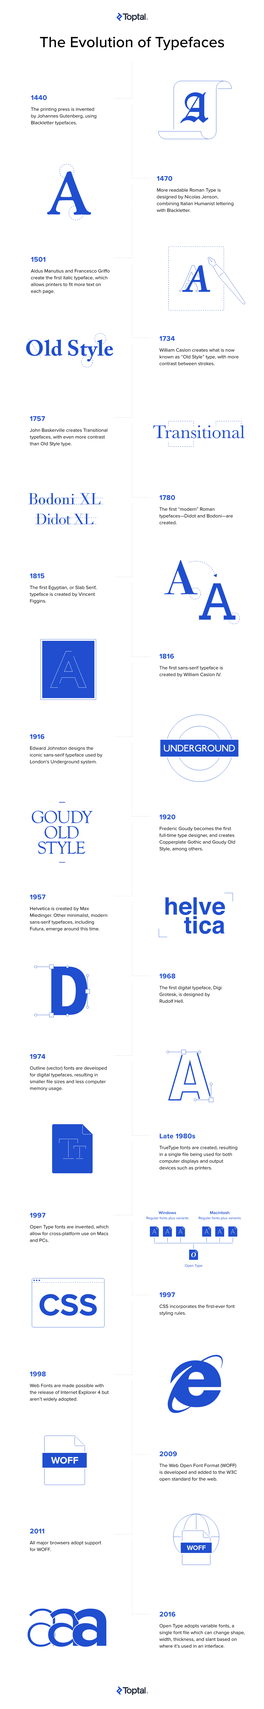 A Typeface History